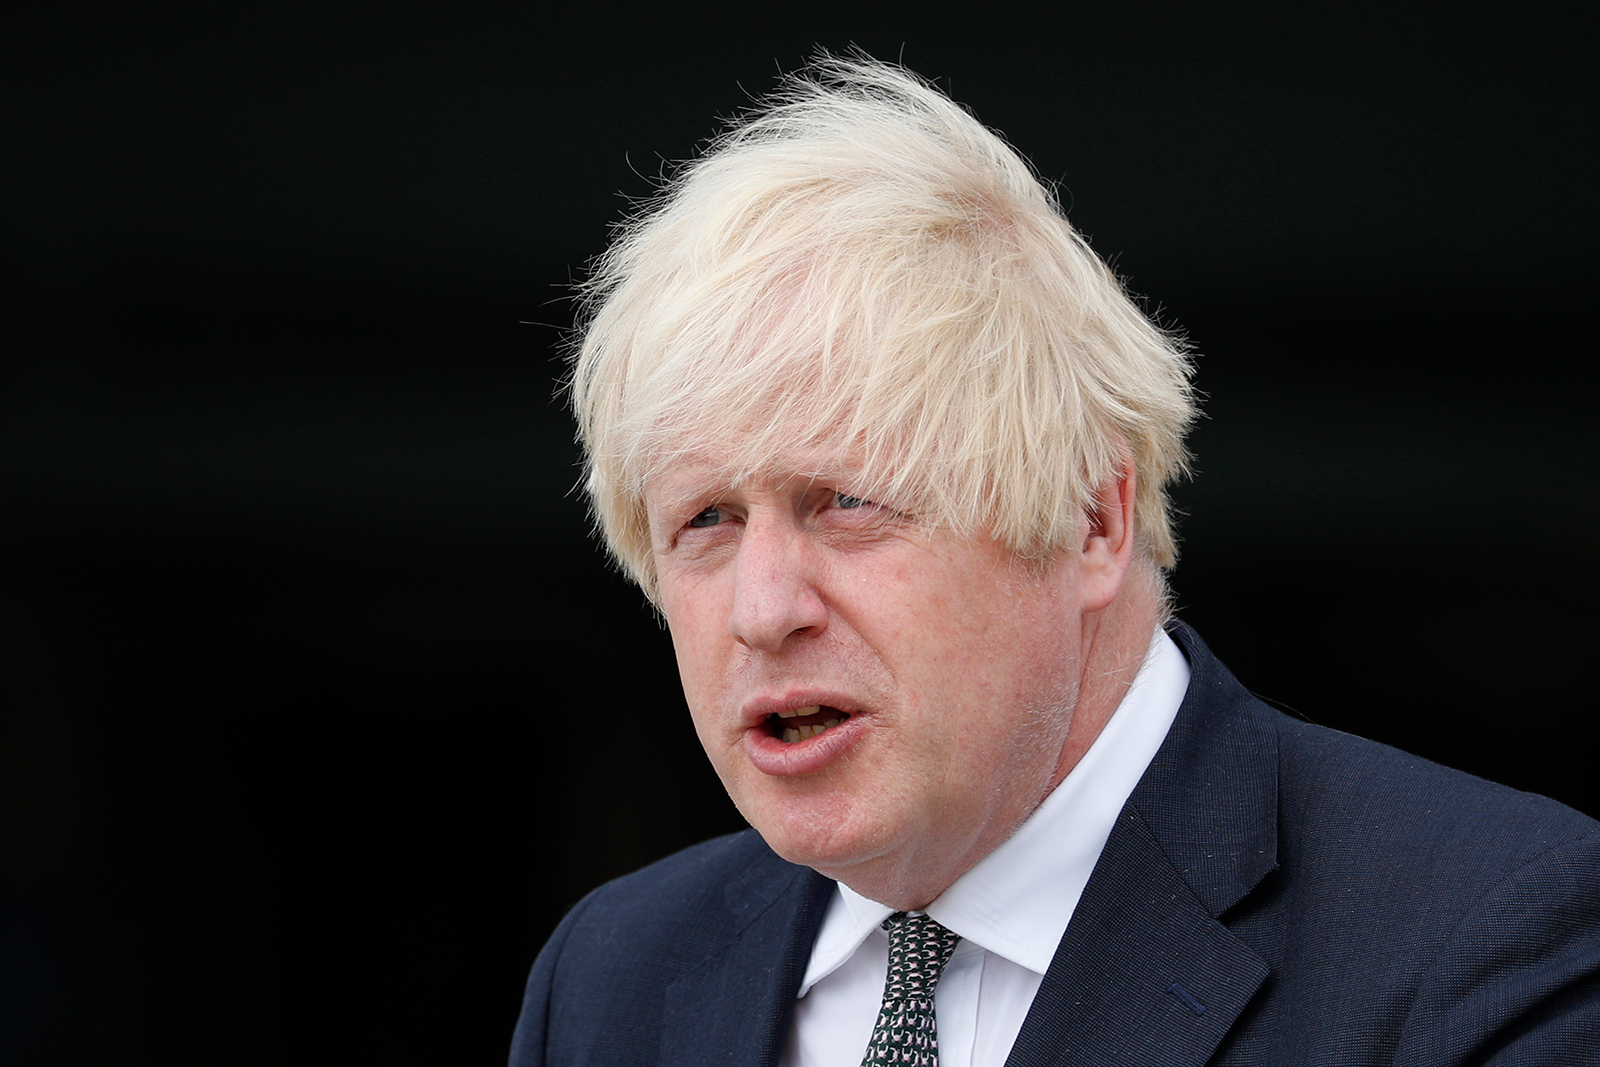 Britain's Prime Minister Boris Johnson leaves following a visit at Northwood Headquarters, the British Armed Forces Permanent Joint Headquarters on August 26.